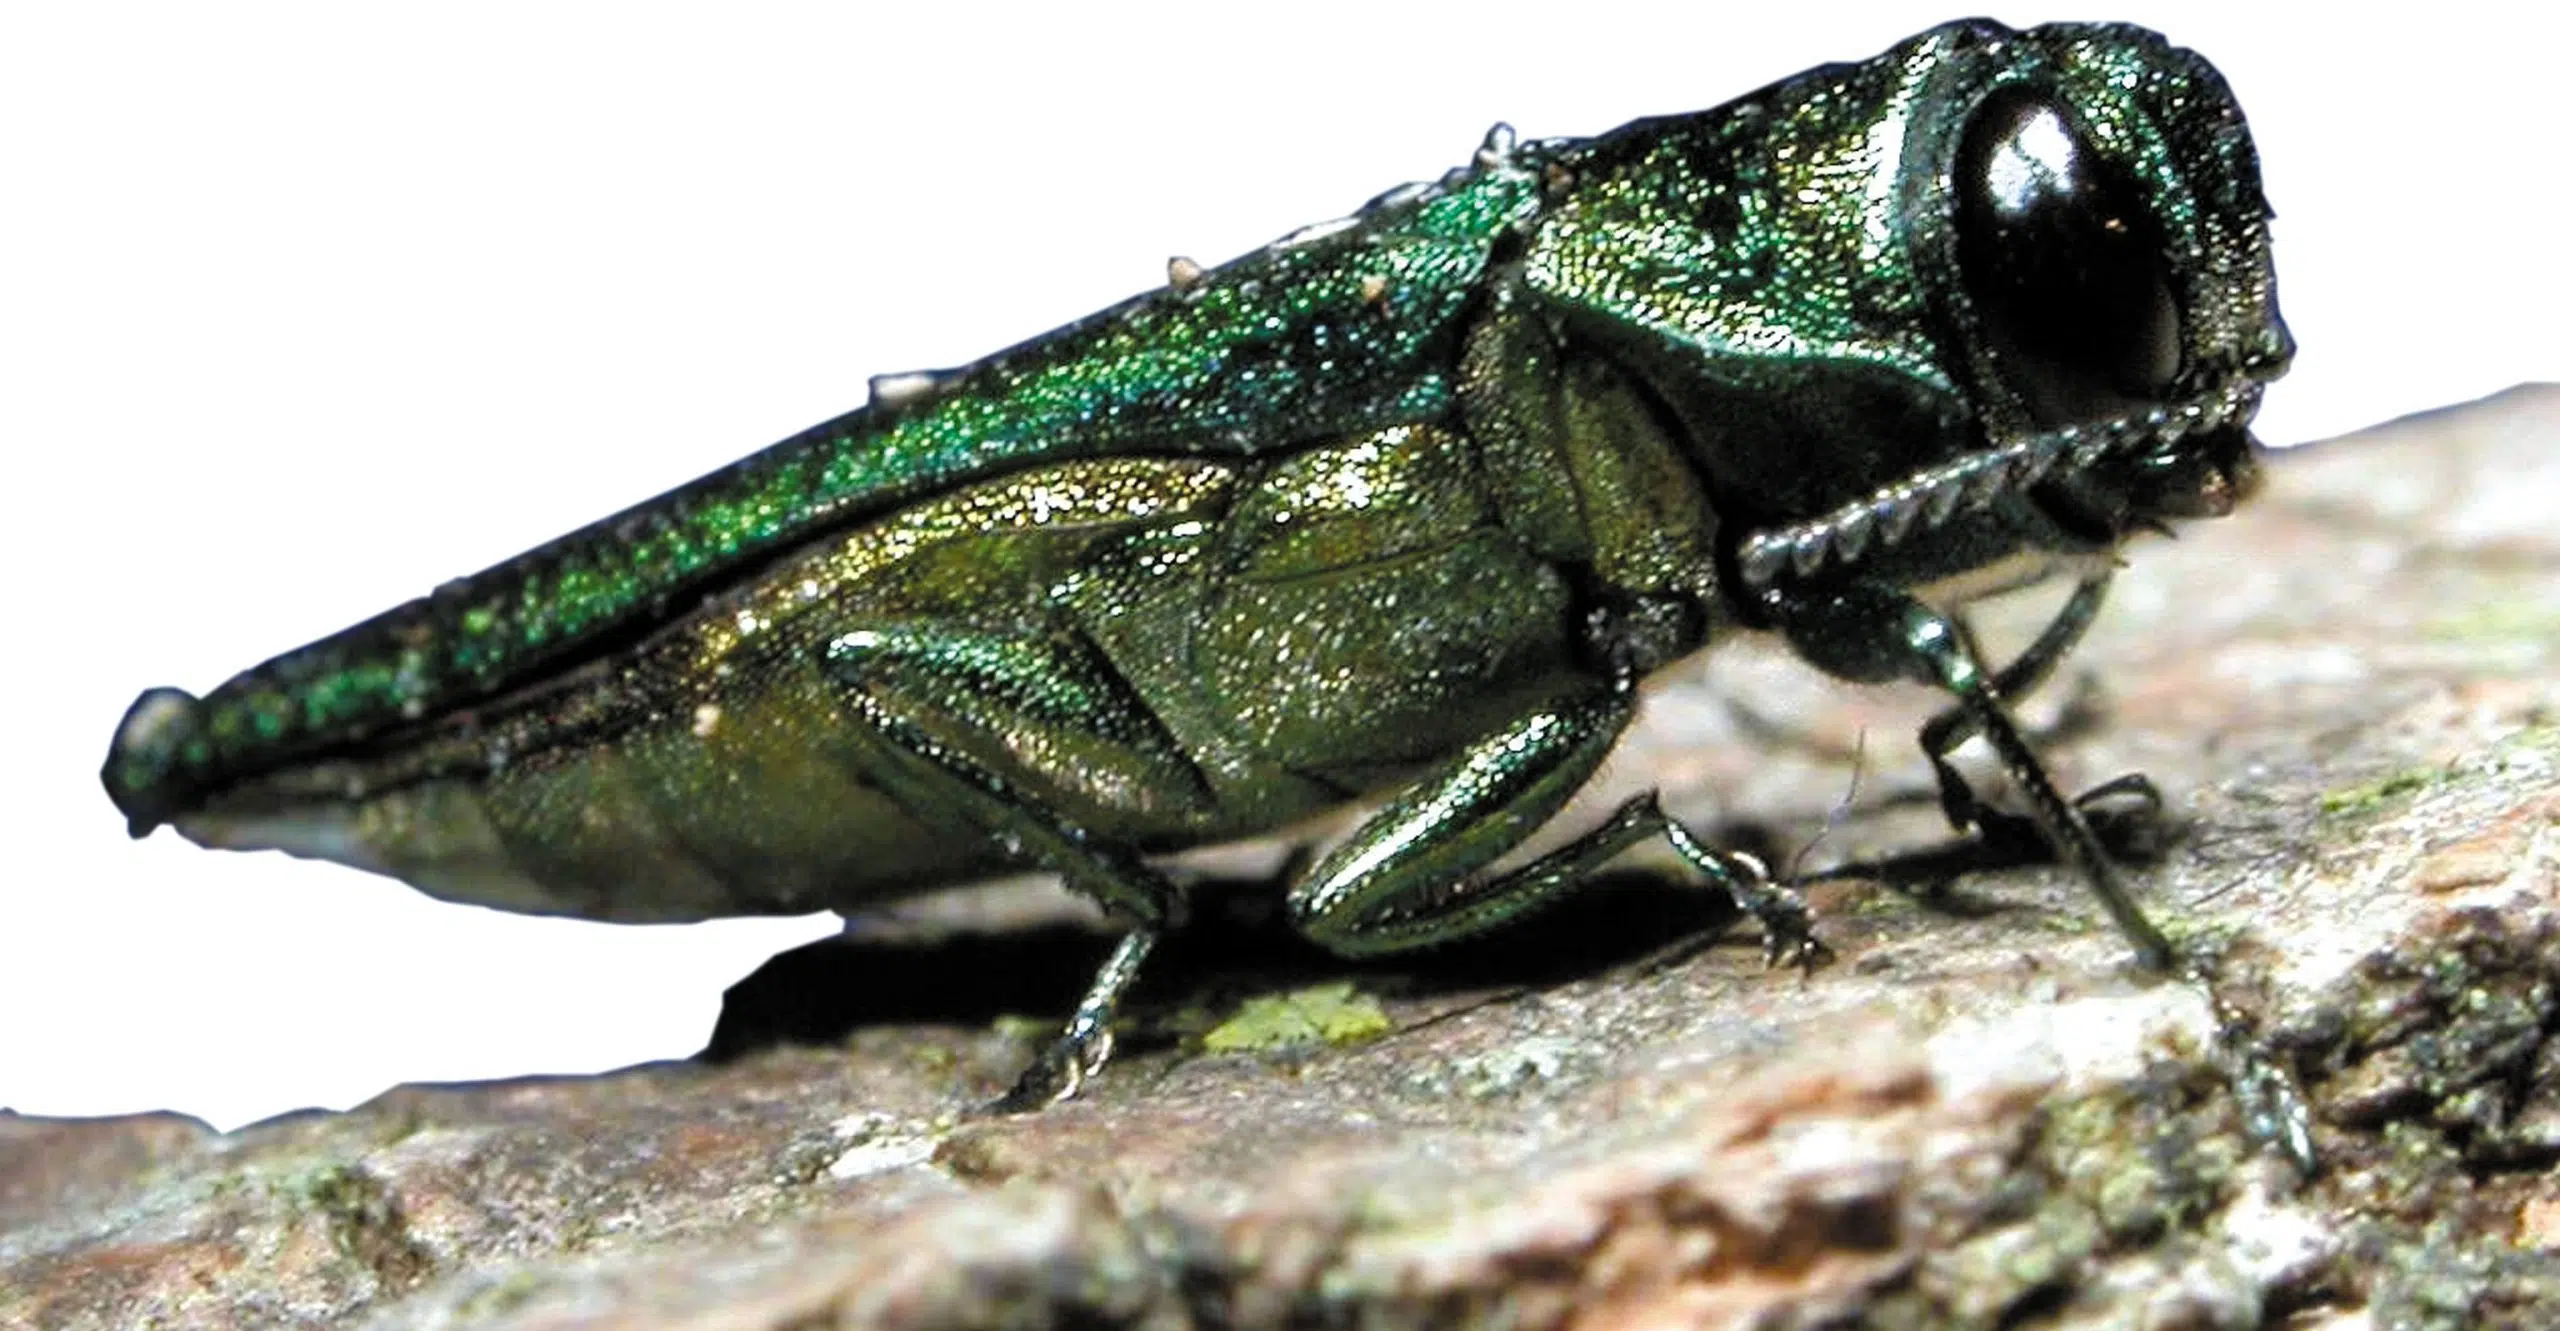 Public Asked To Be On The Lookout For Invasive Beetle Species